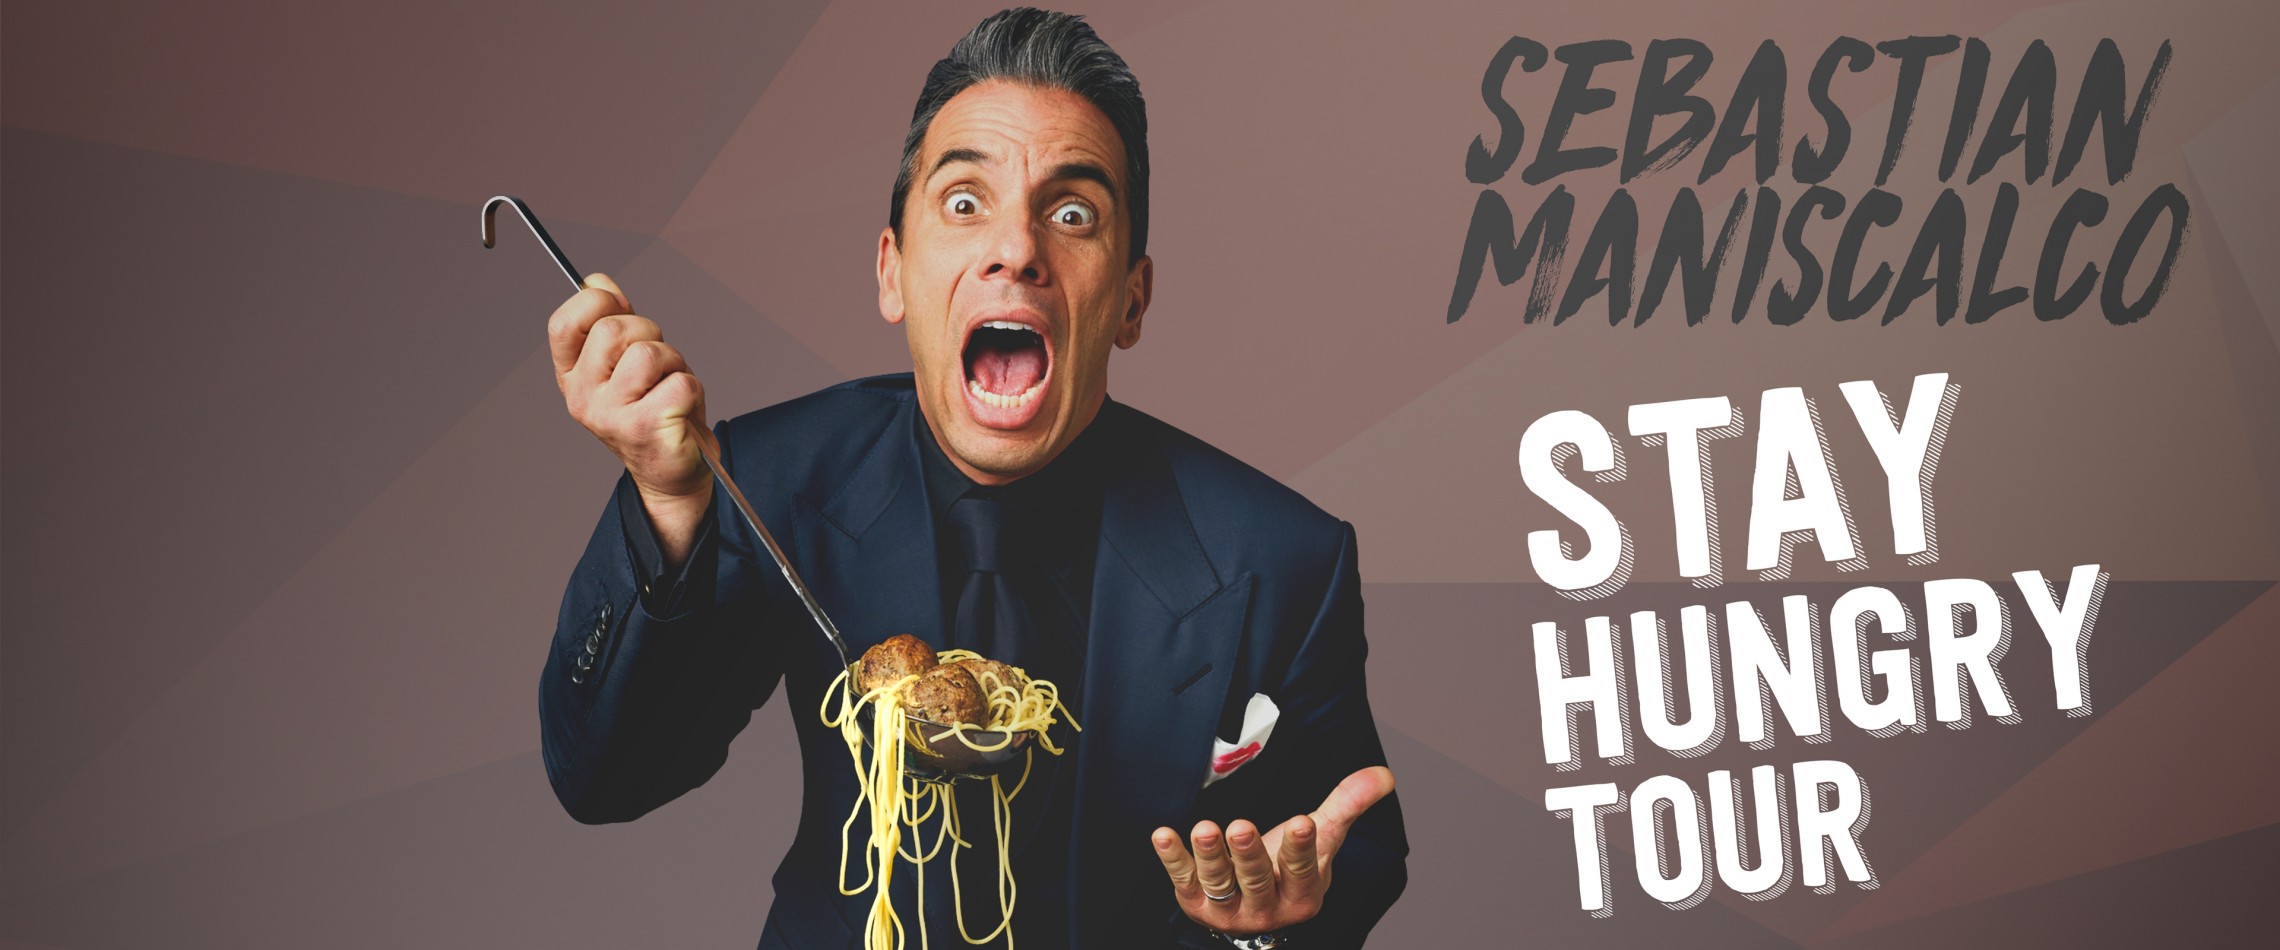 Sebastian Maniscalco Stay Hungry Tour Live At The Eccles